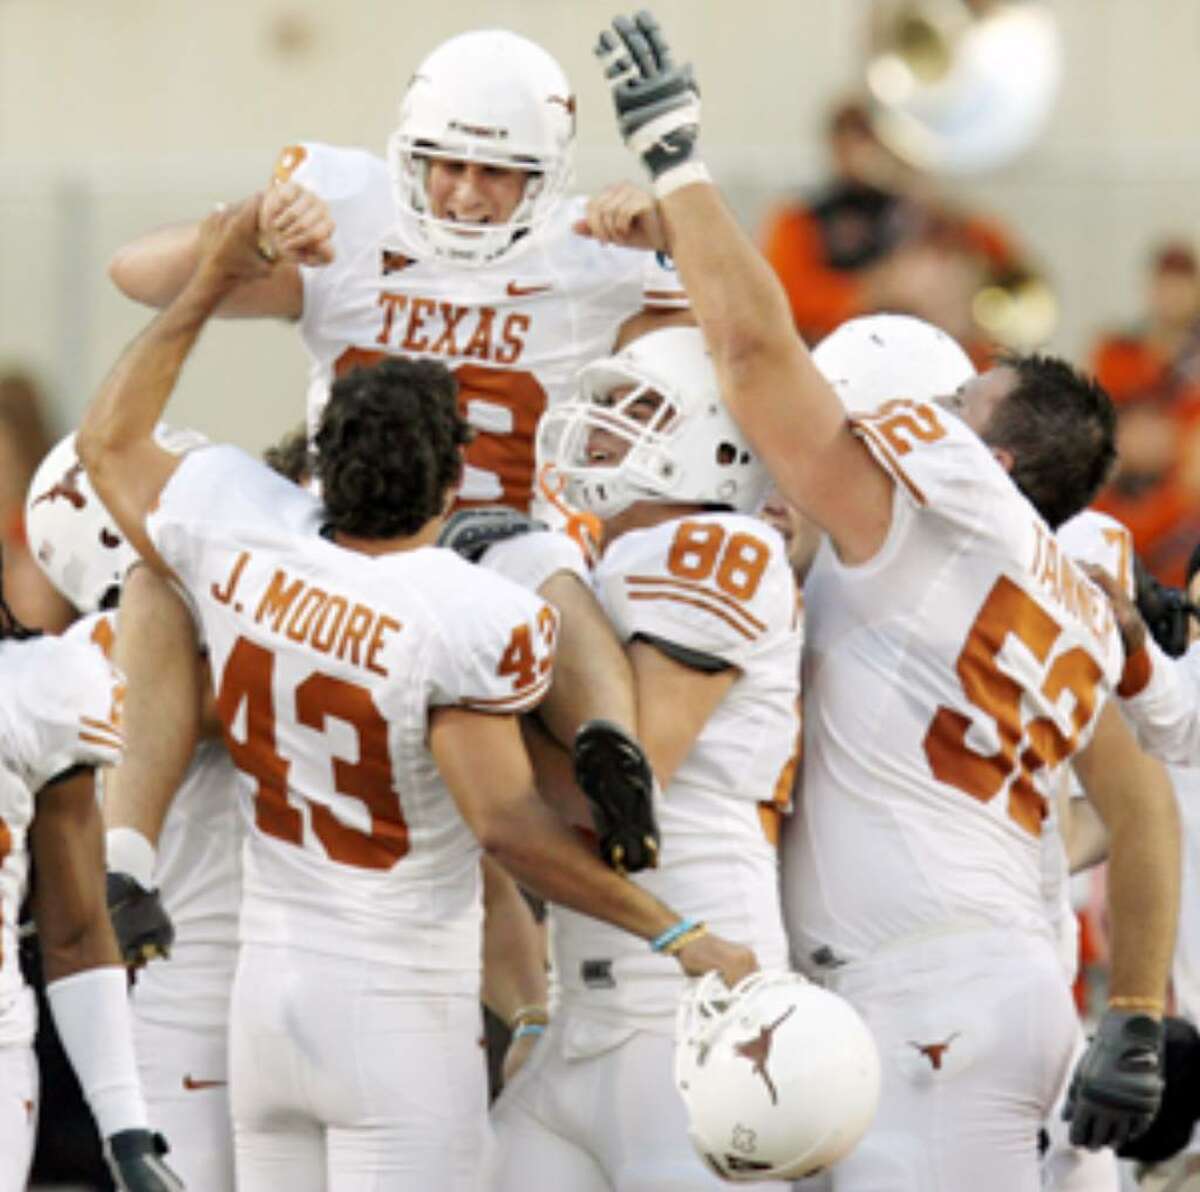 Texas' Ryan Bailey (being carried by teammates) hit the game-winning field goal as time expired in 2007 to give the Longhorns a 38-35 win in Stillwater, Okla.